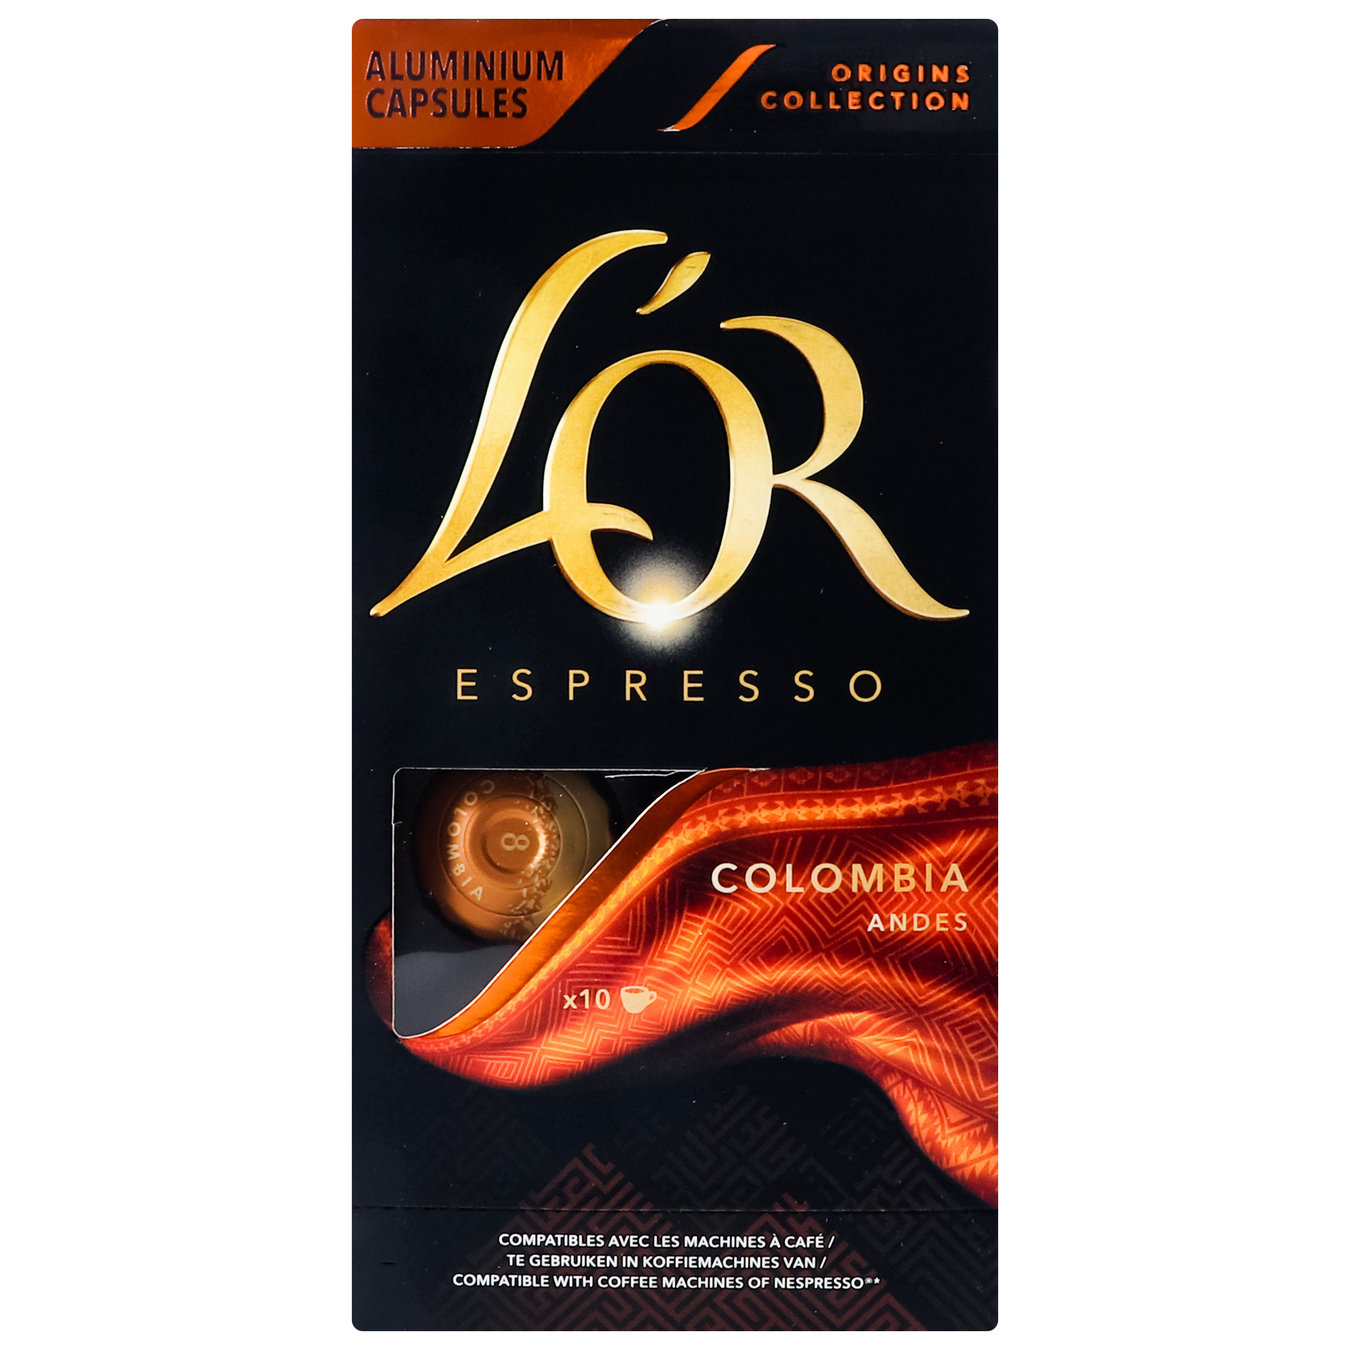 Coffee L'OR Espresso Colombia Andes roasted in capsules 52g